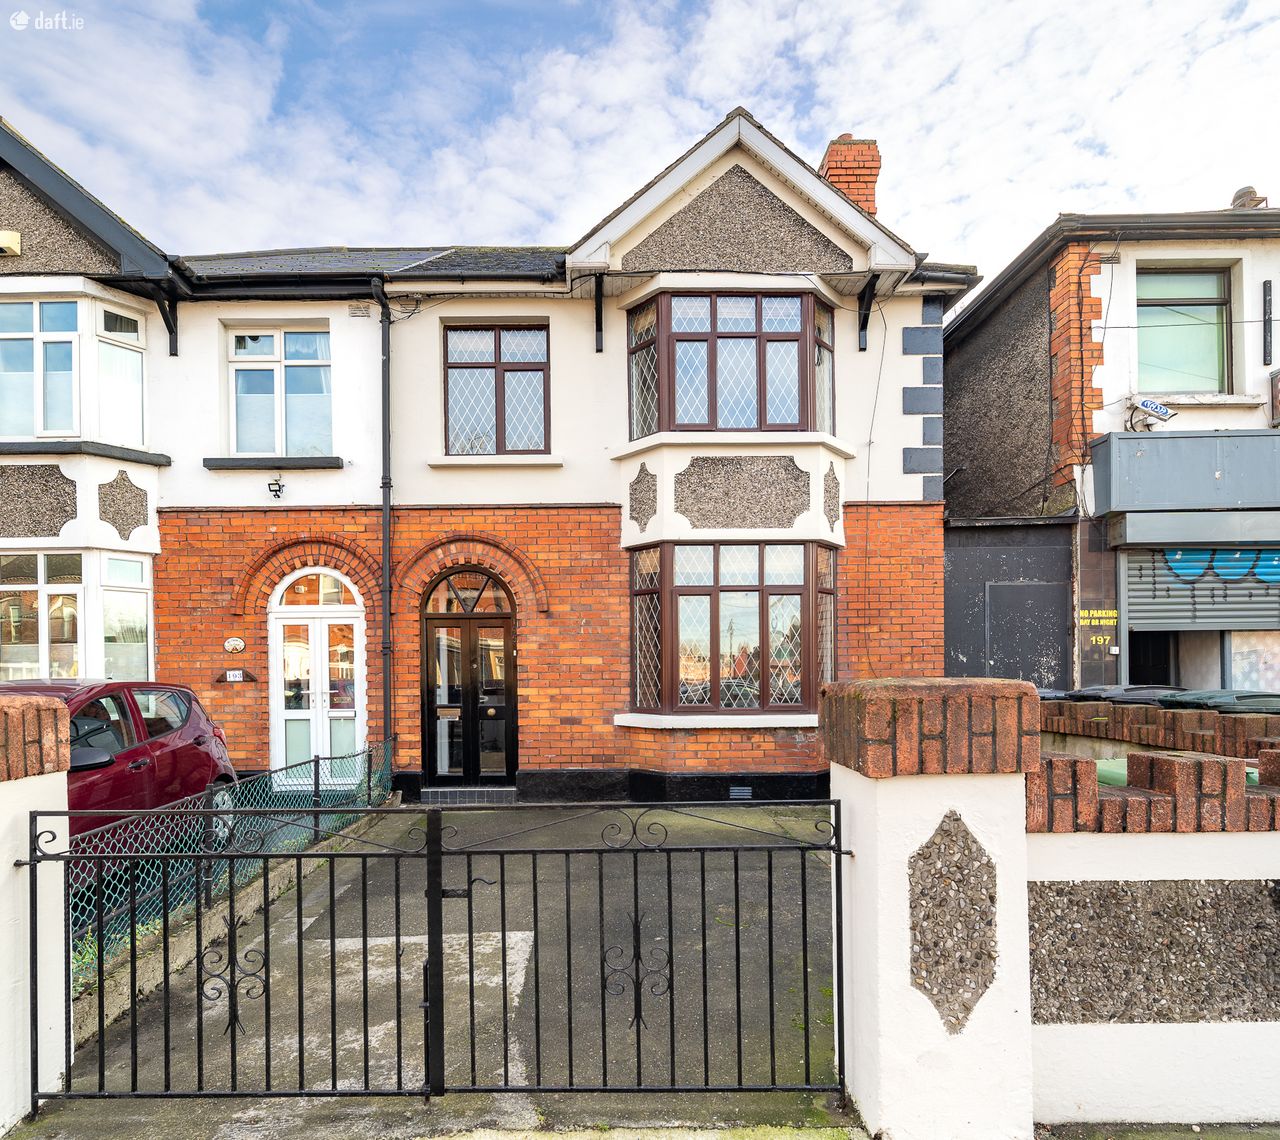 195 Tyrconnell Road, Inchicore, Inchicore, Dublin 8